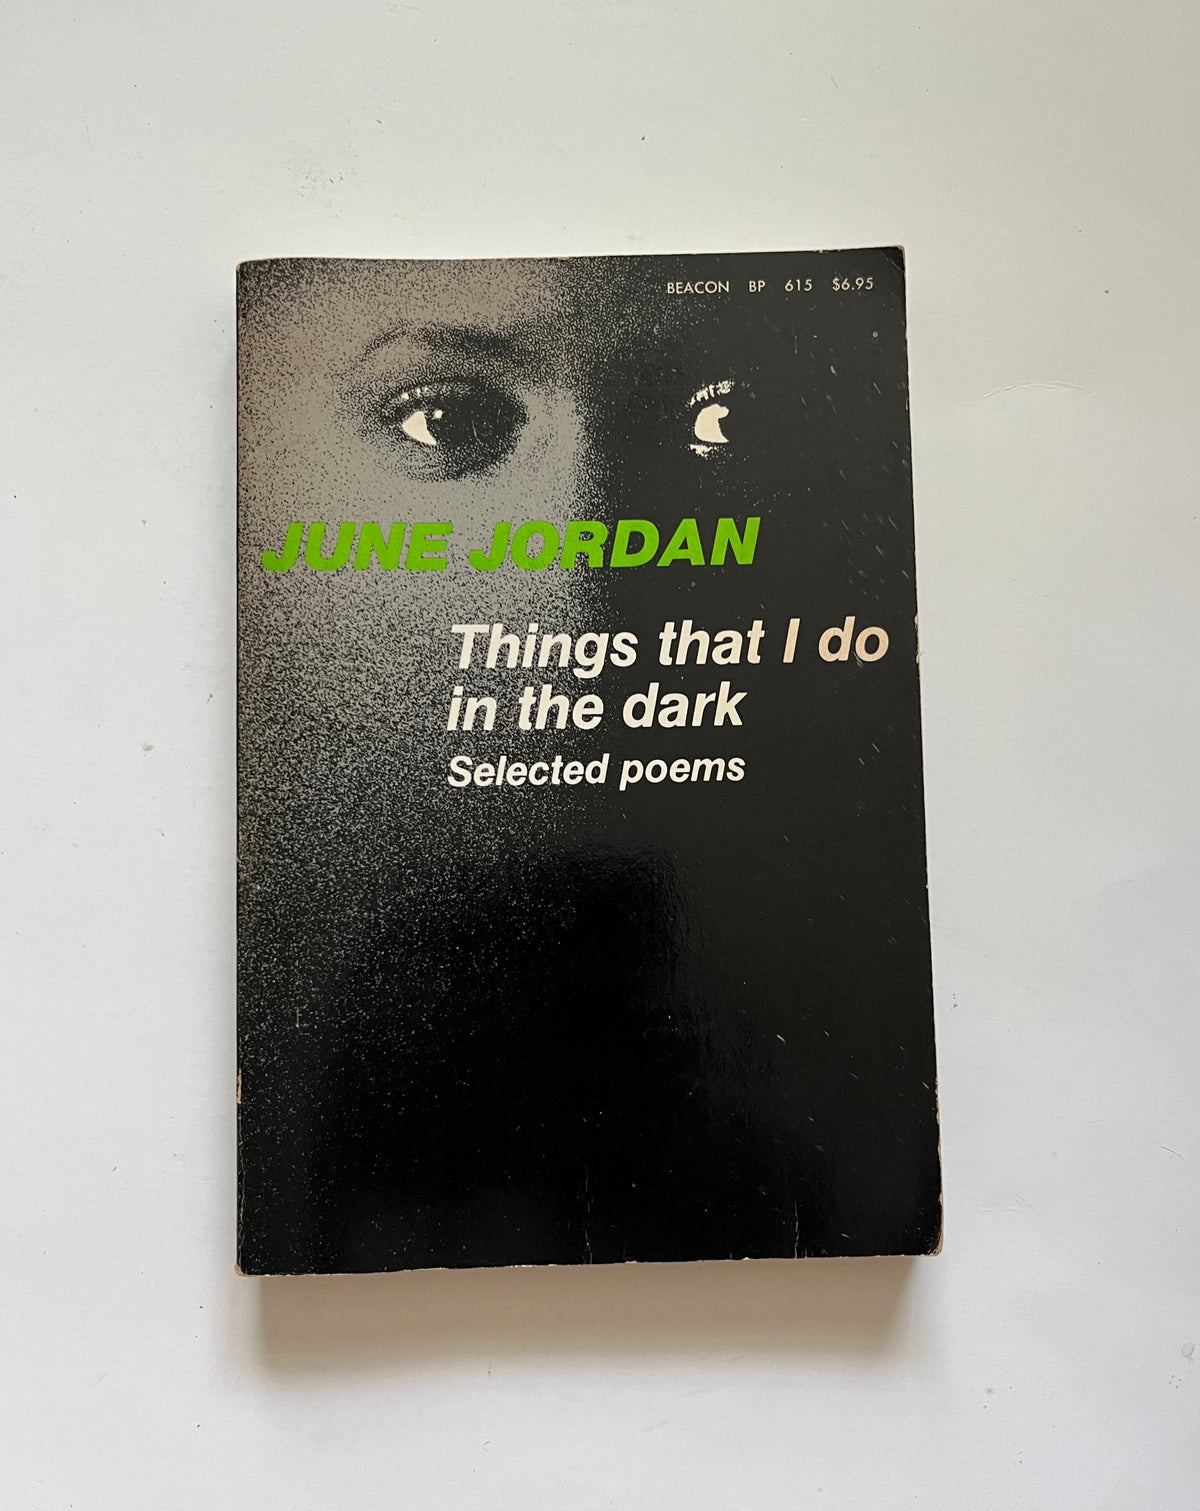 Thing That I Do in the Dark by June Jordan